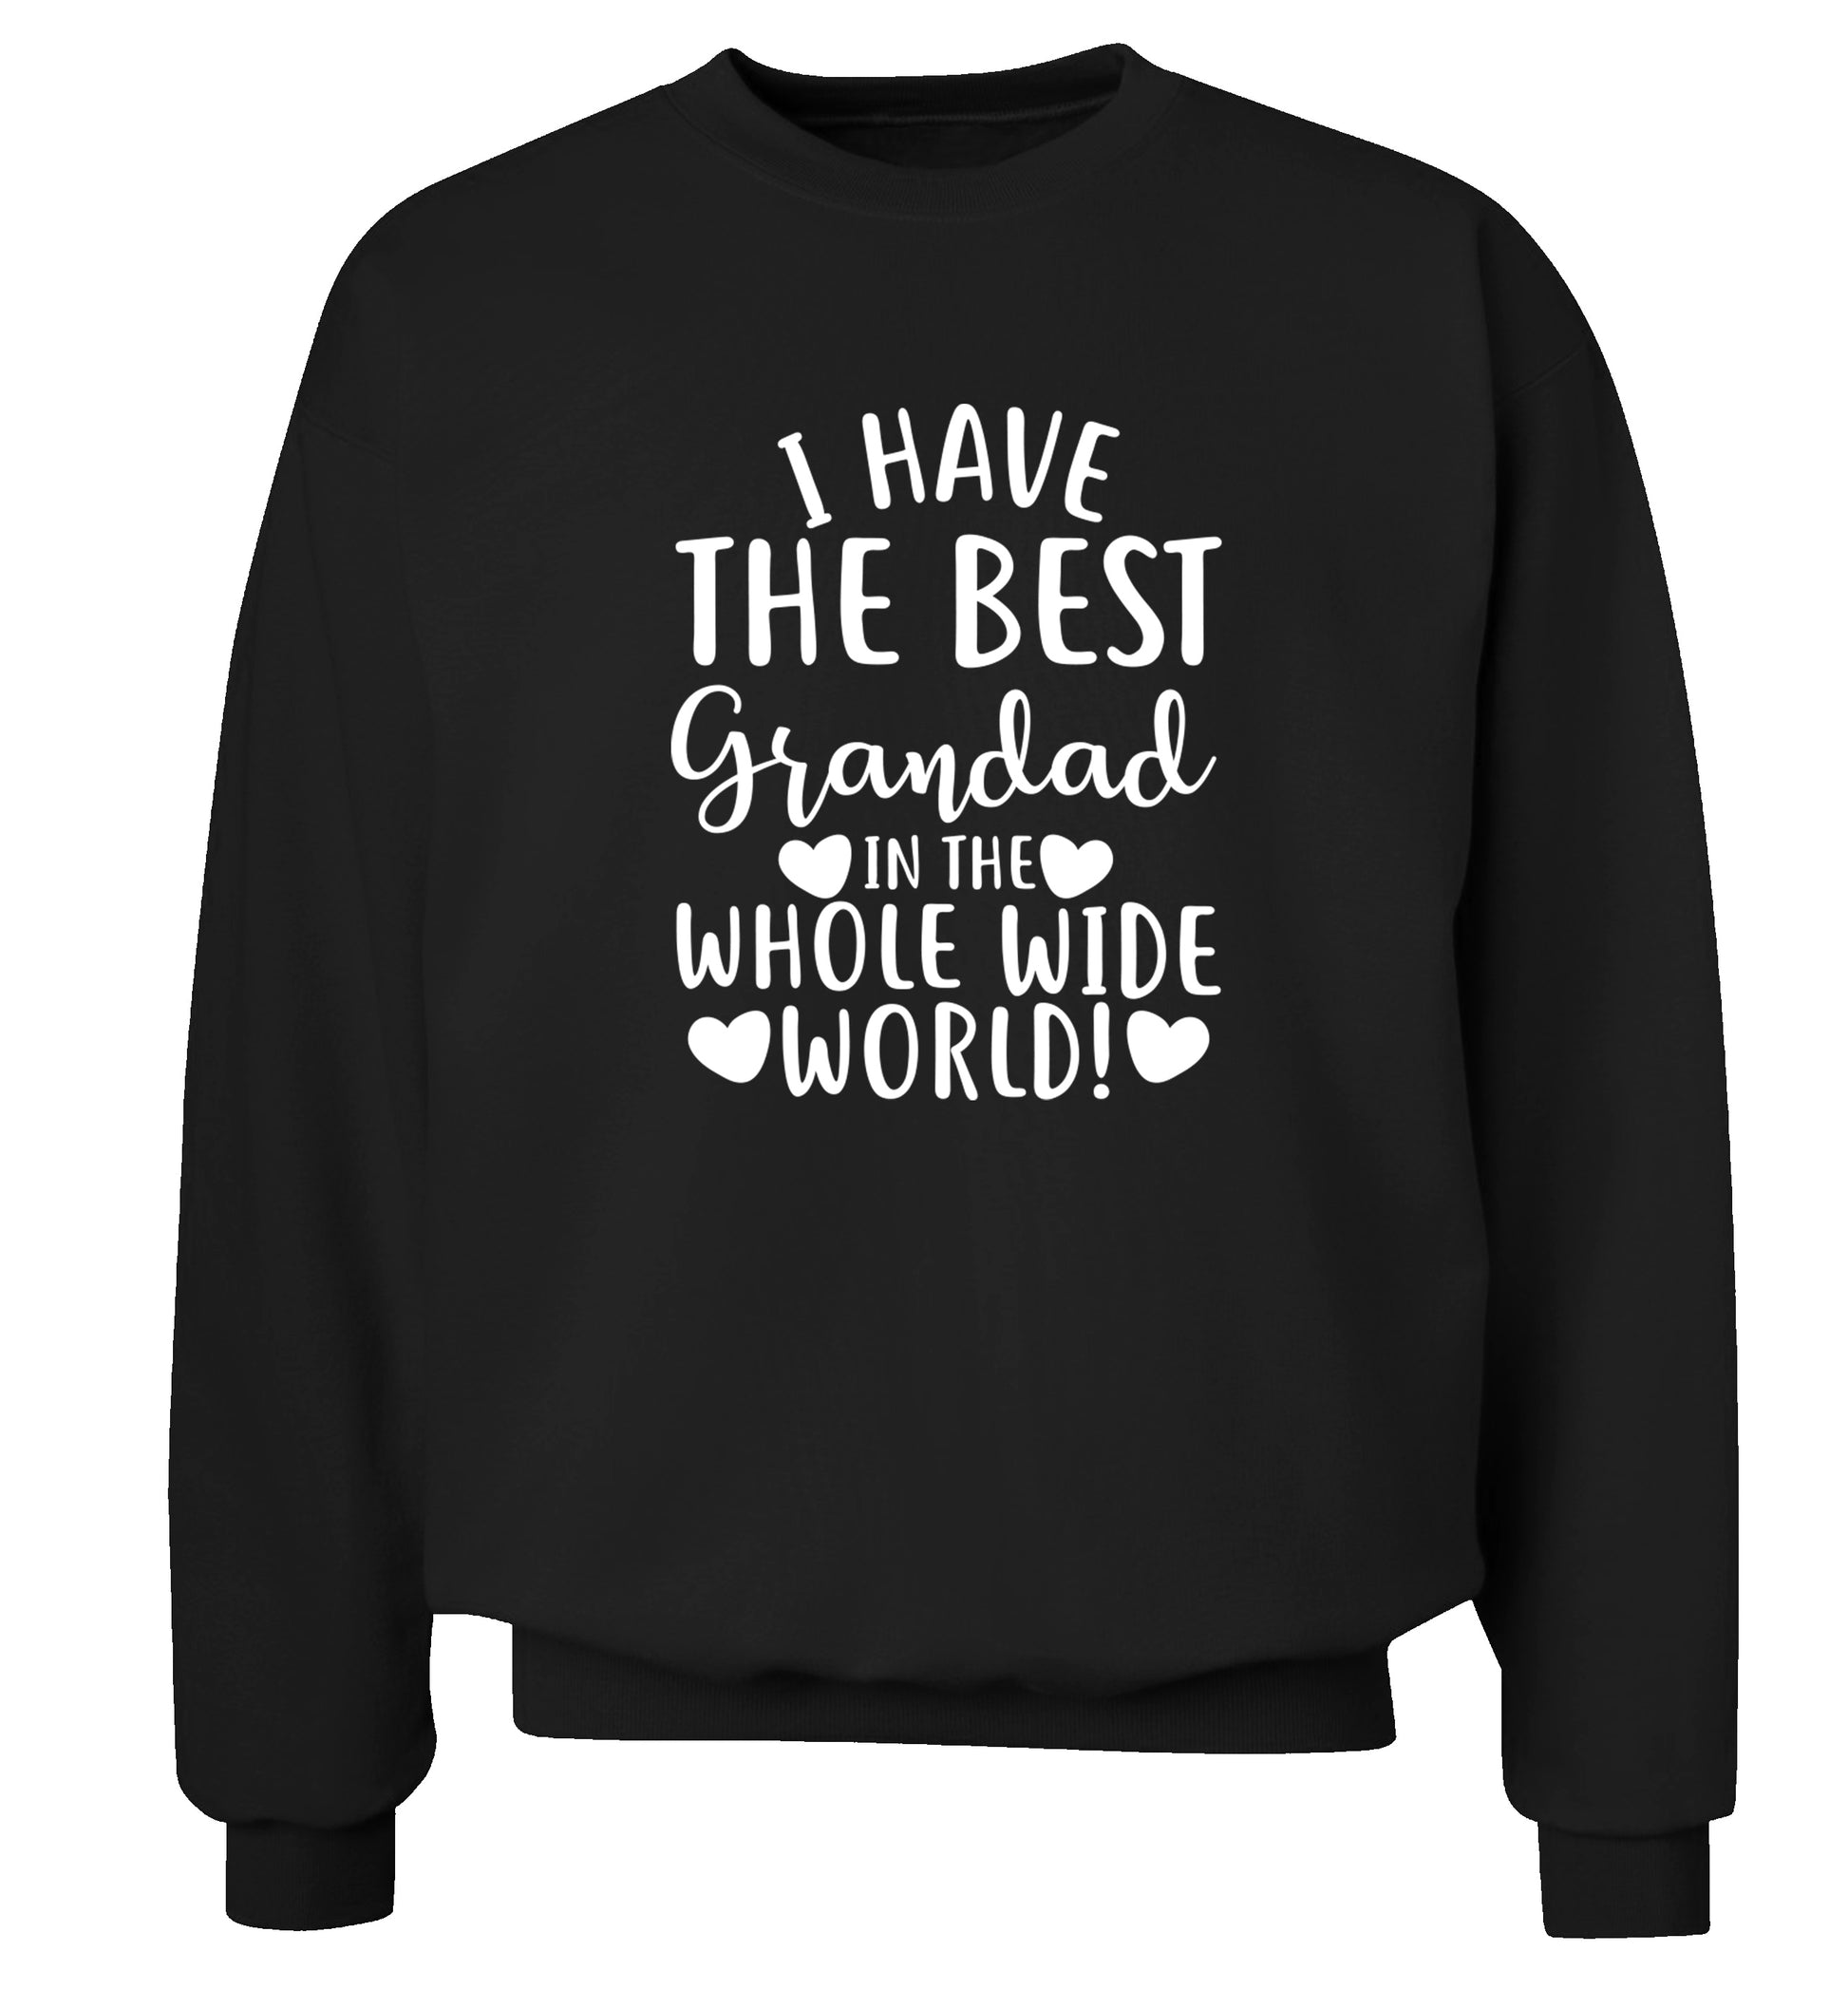 I have the best grandad in the whole wide world! Adult's unisex black Sweater 2XL